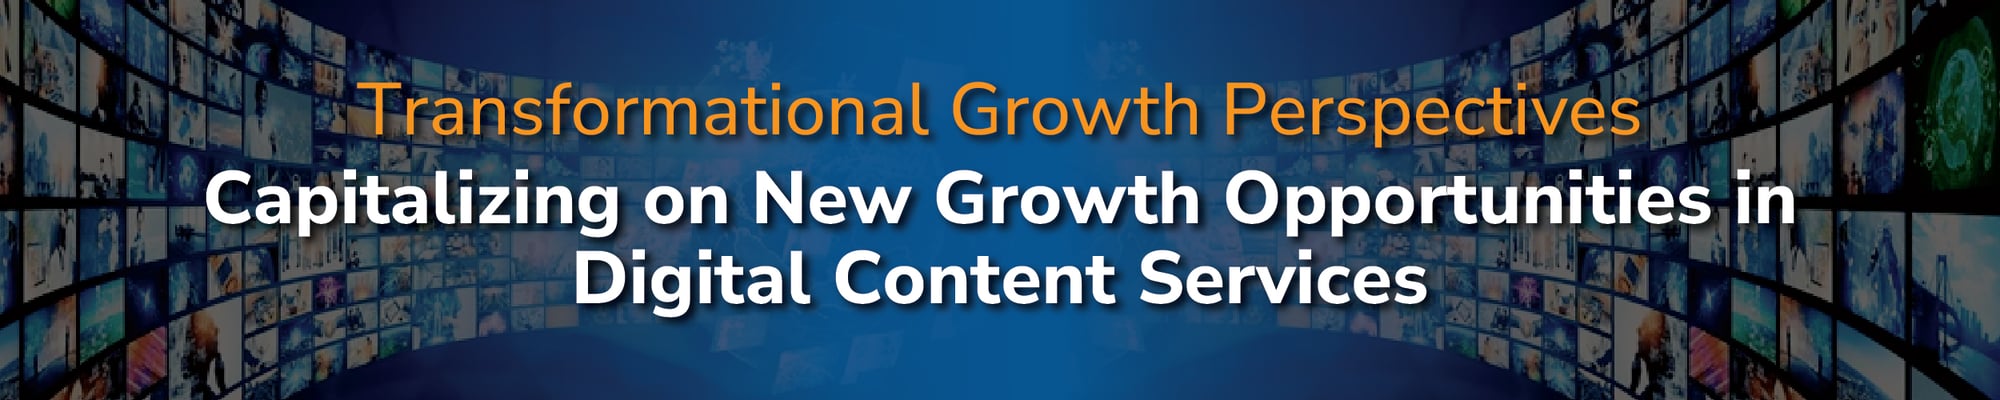 Transformational Growth Perspectives 	Capitalizing on New Growth Opportunities in Digital Content Services